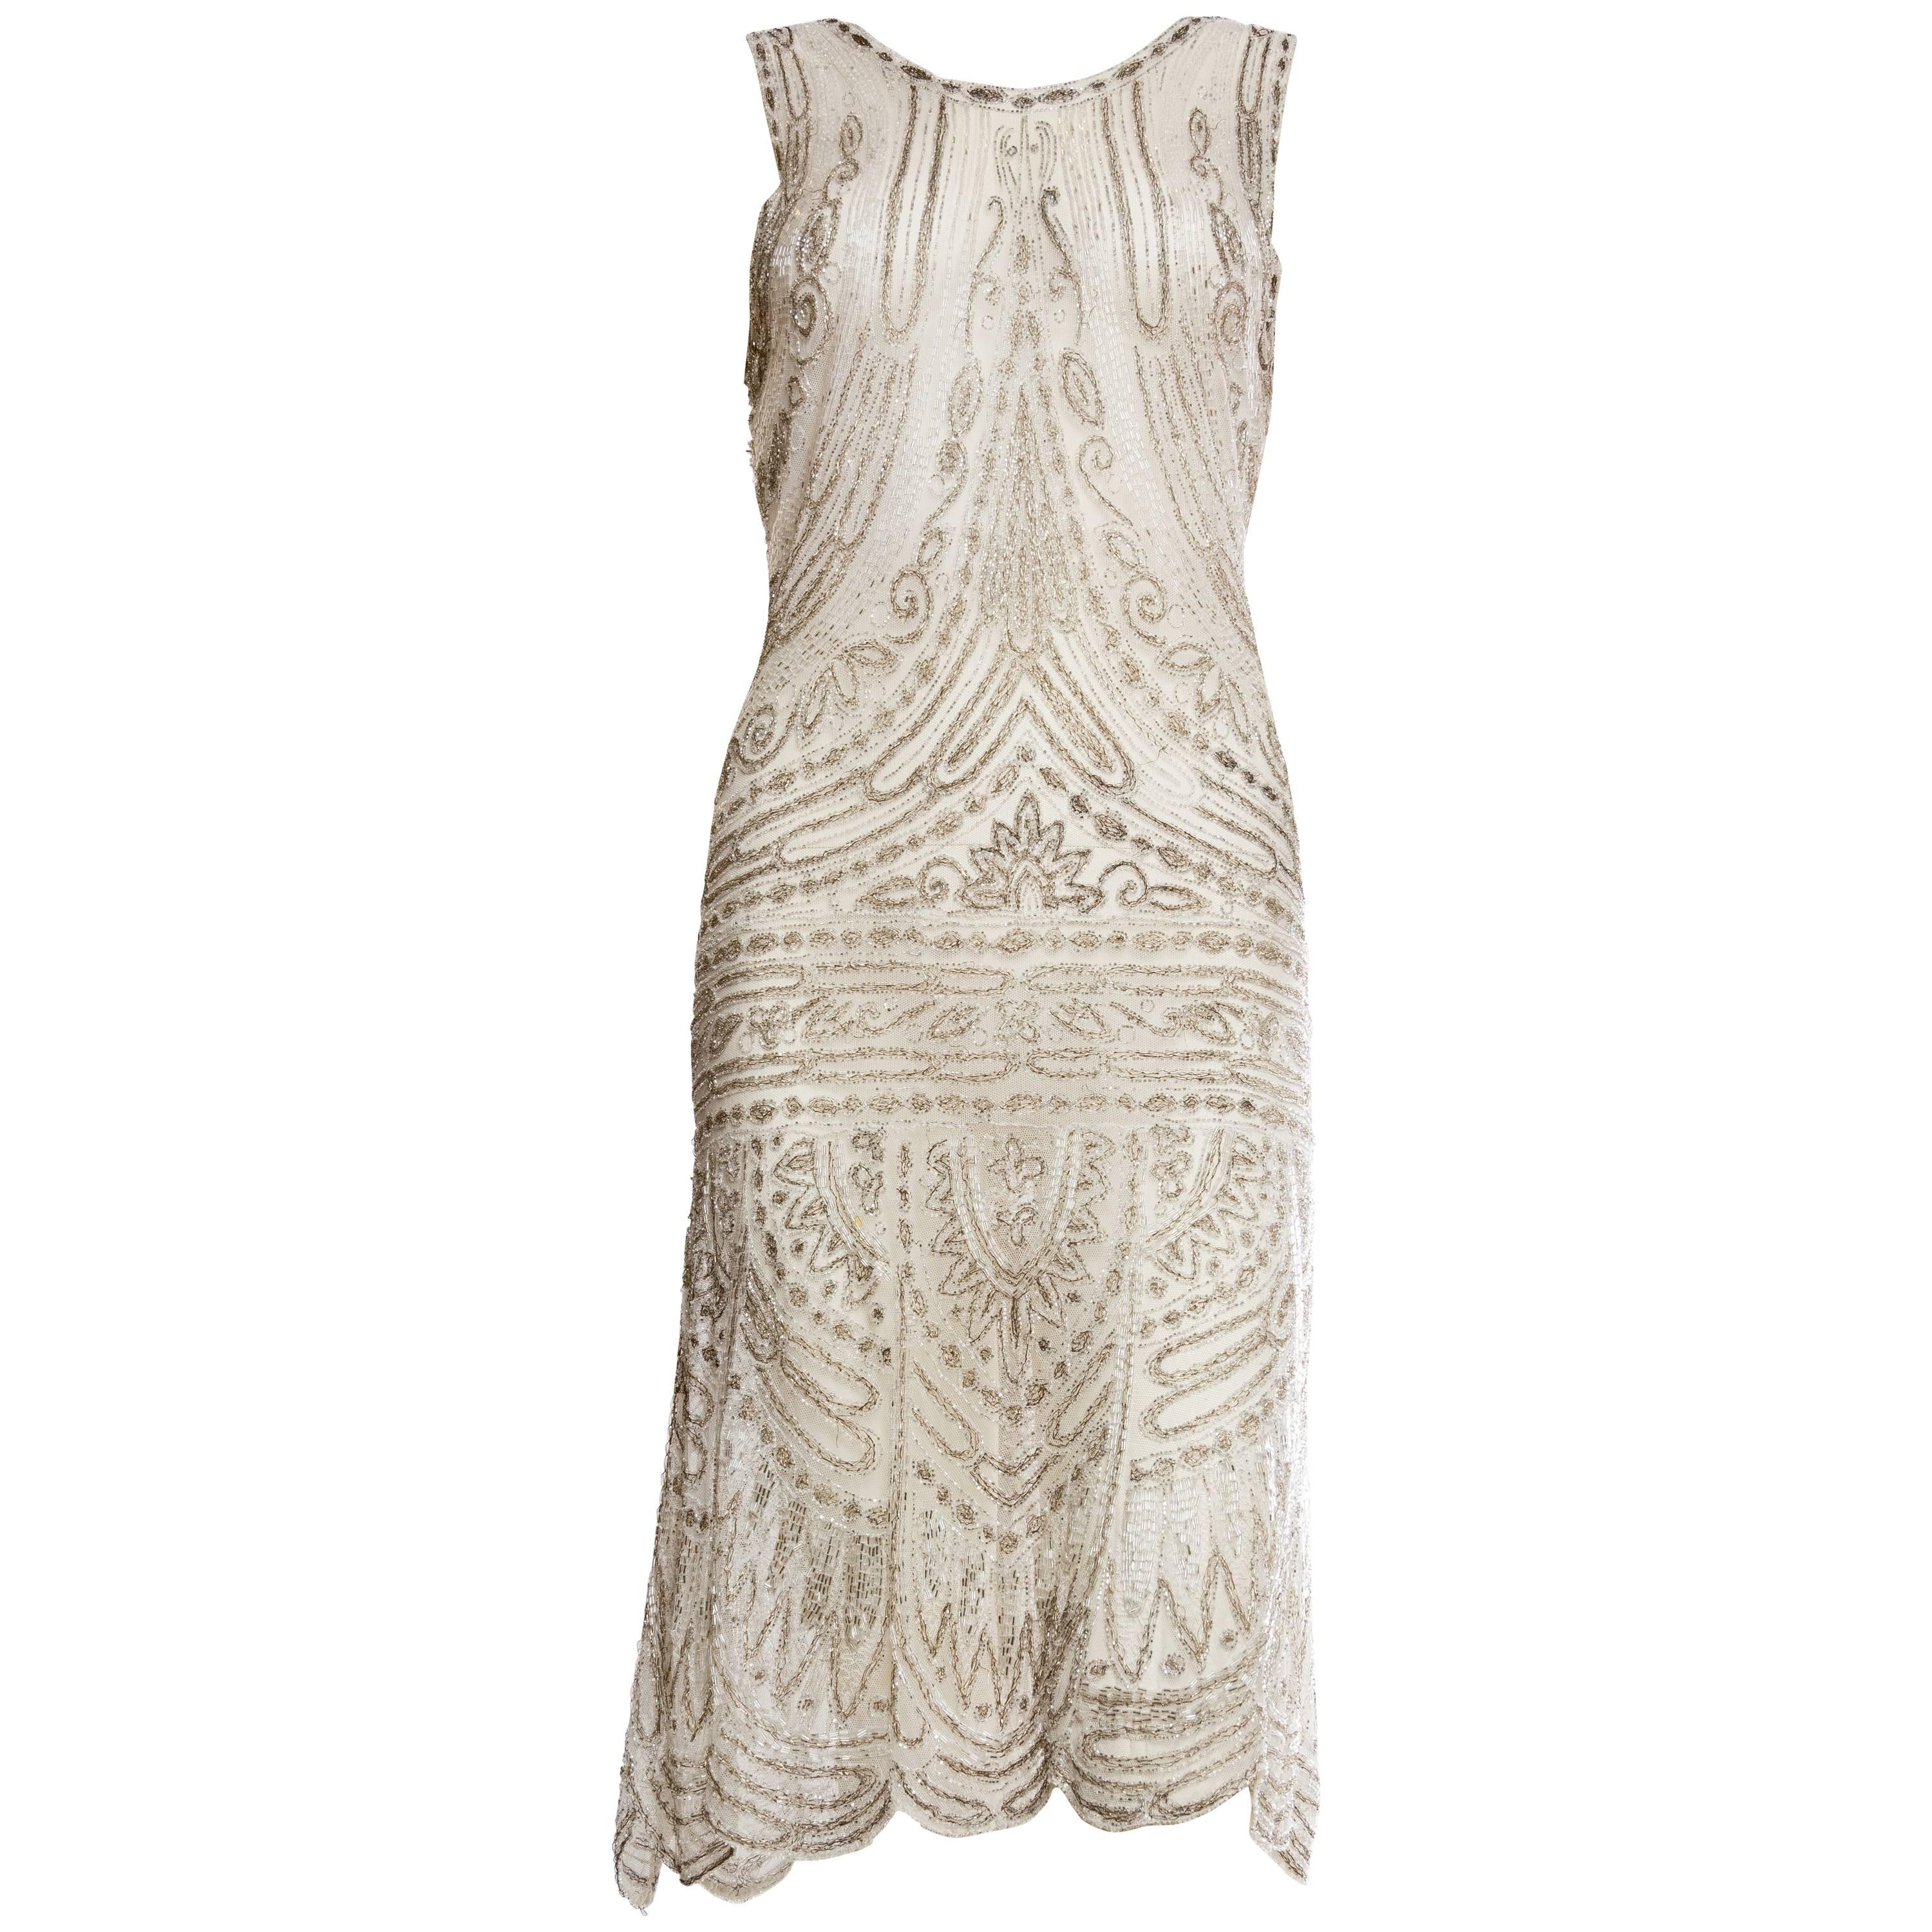 1920s Beaded Net Dress Embroidered with Silver Threads